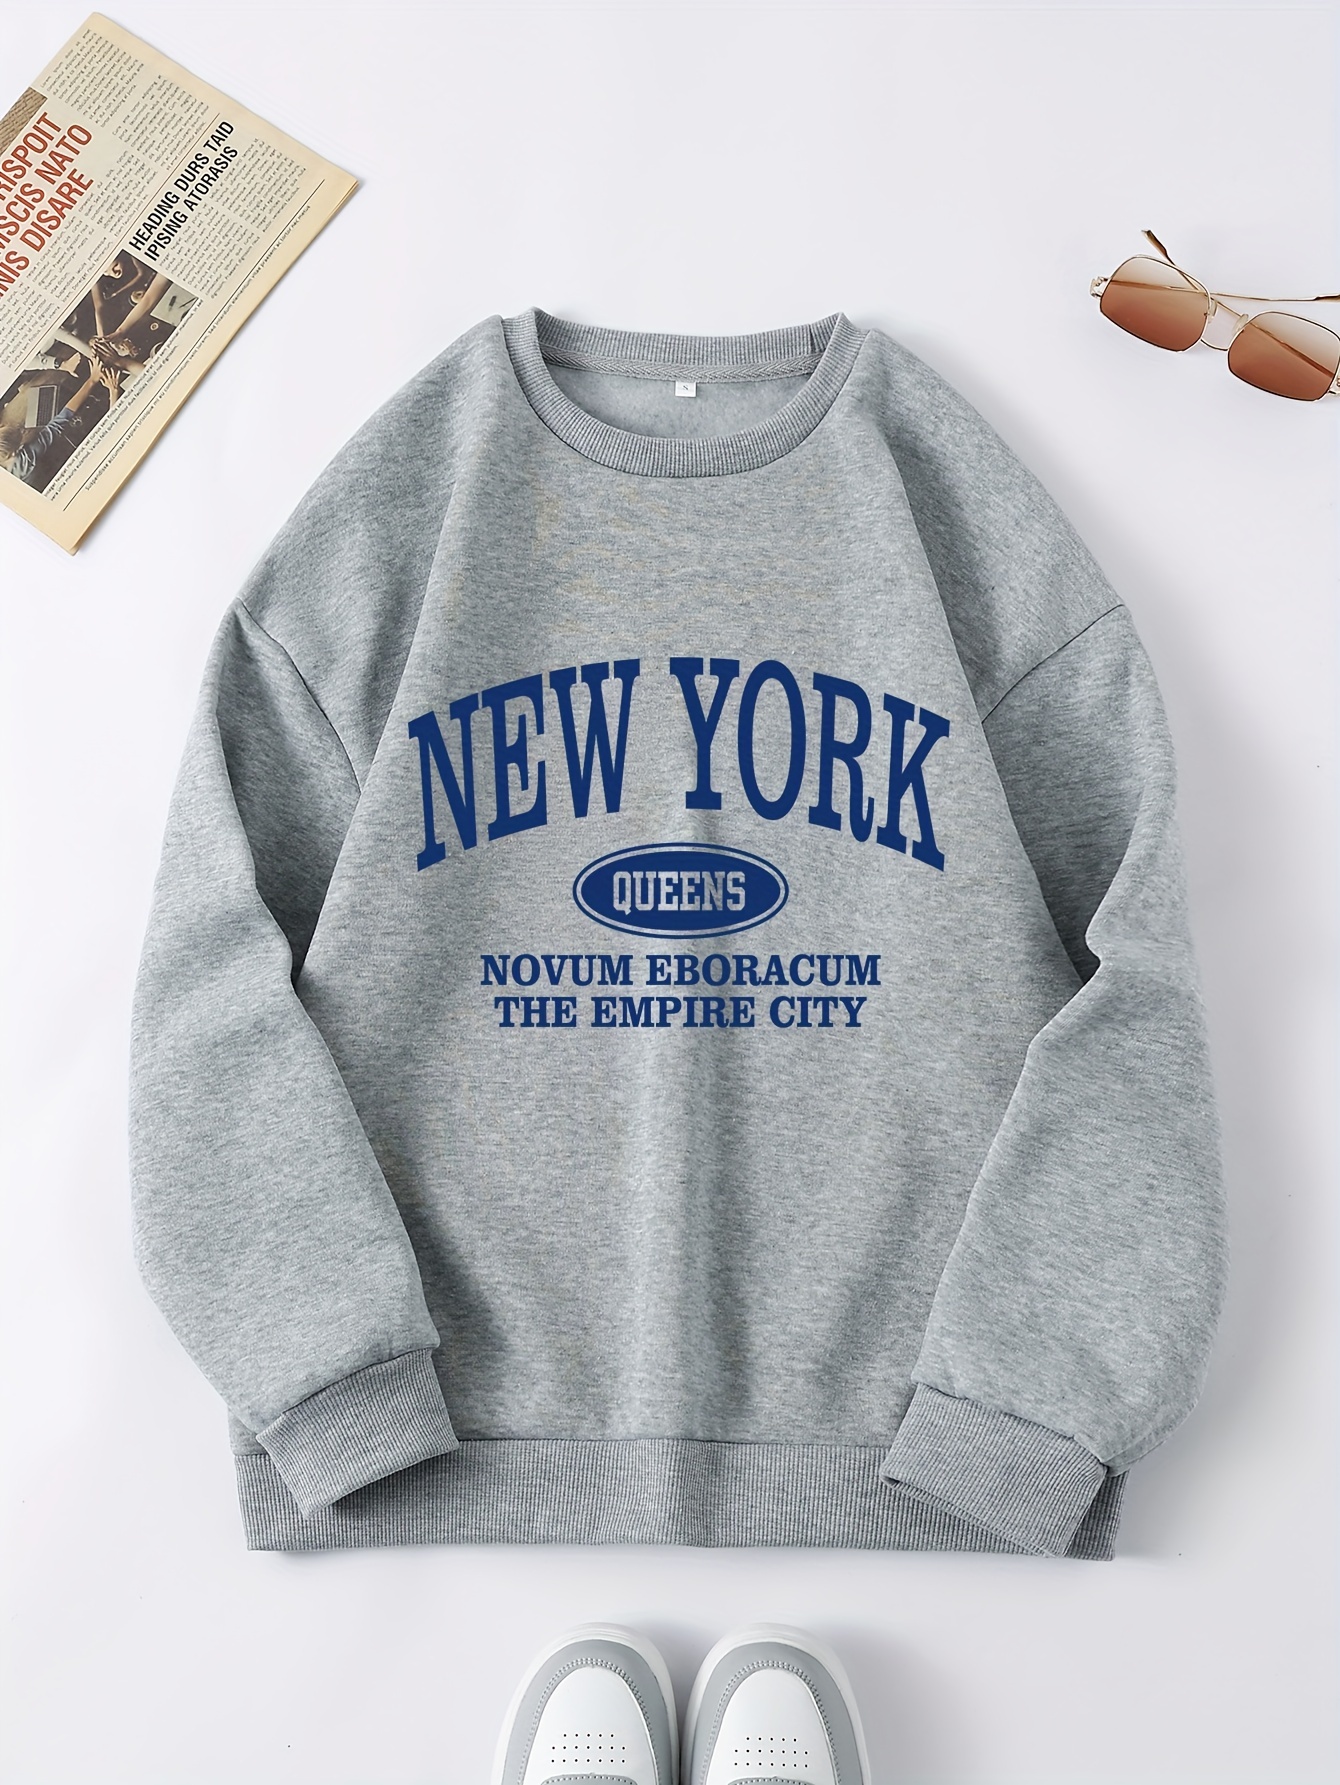 SheIn Women's Casual Long Sleeve Pullover Sweatshirt Letter Print Tops Fall  Clothes Grey L : Buy Online at Best Price in KSA - Souq is now :  Fashion